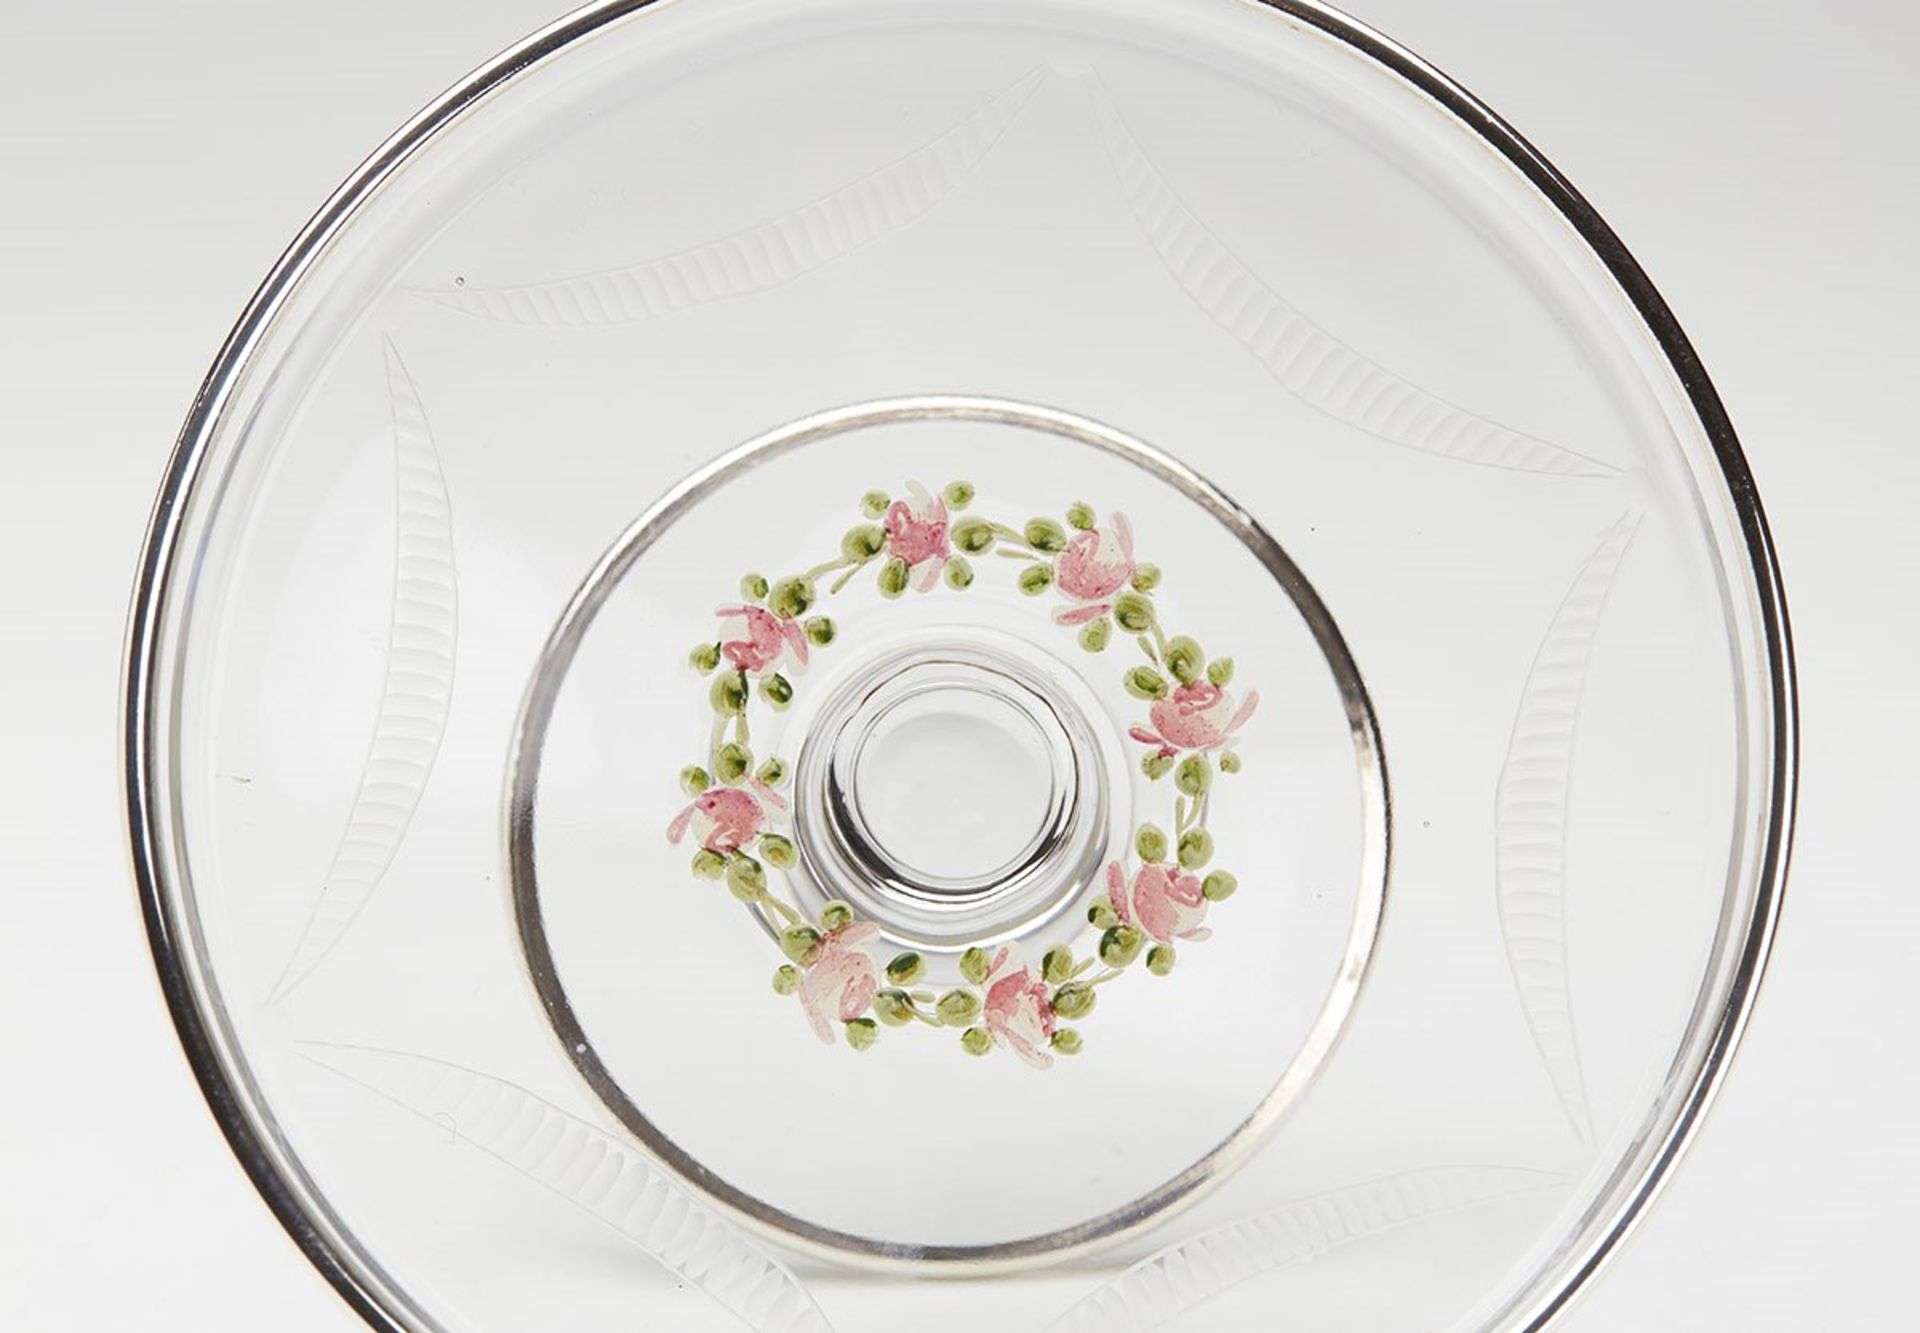 Antique Silver Overlay Floral Enamel Glass Tazza 19Th C. - Image 5 of 6